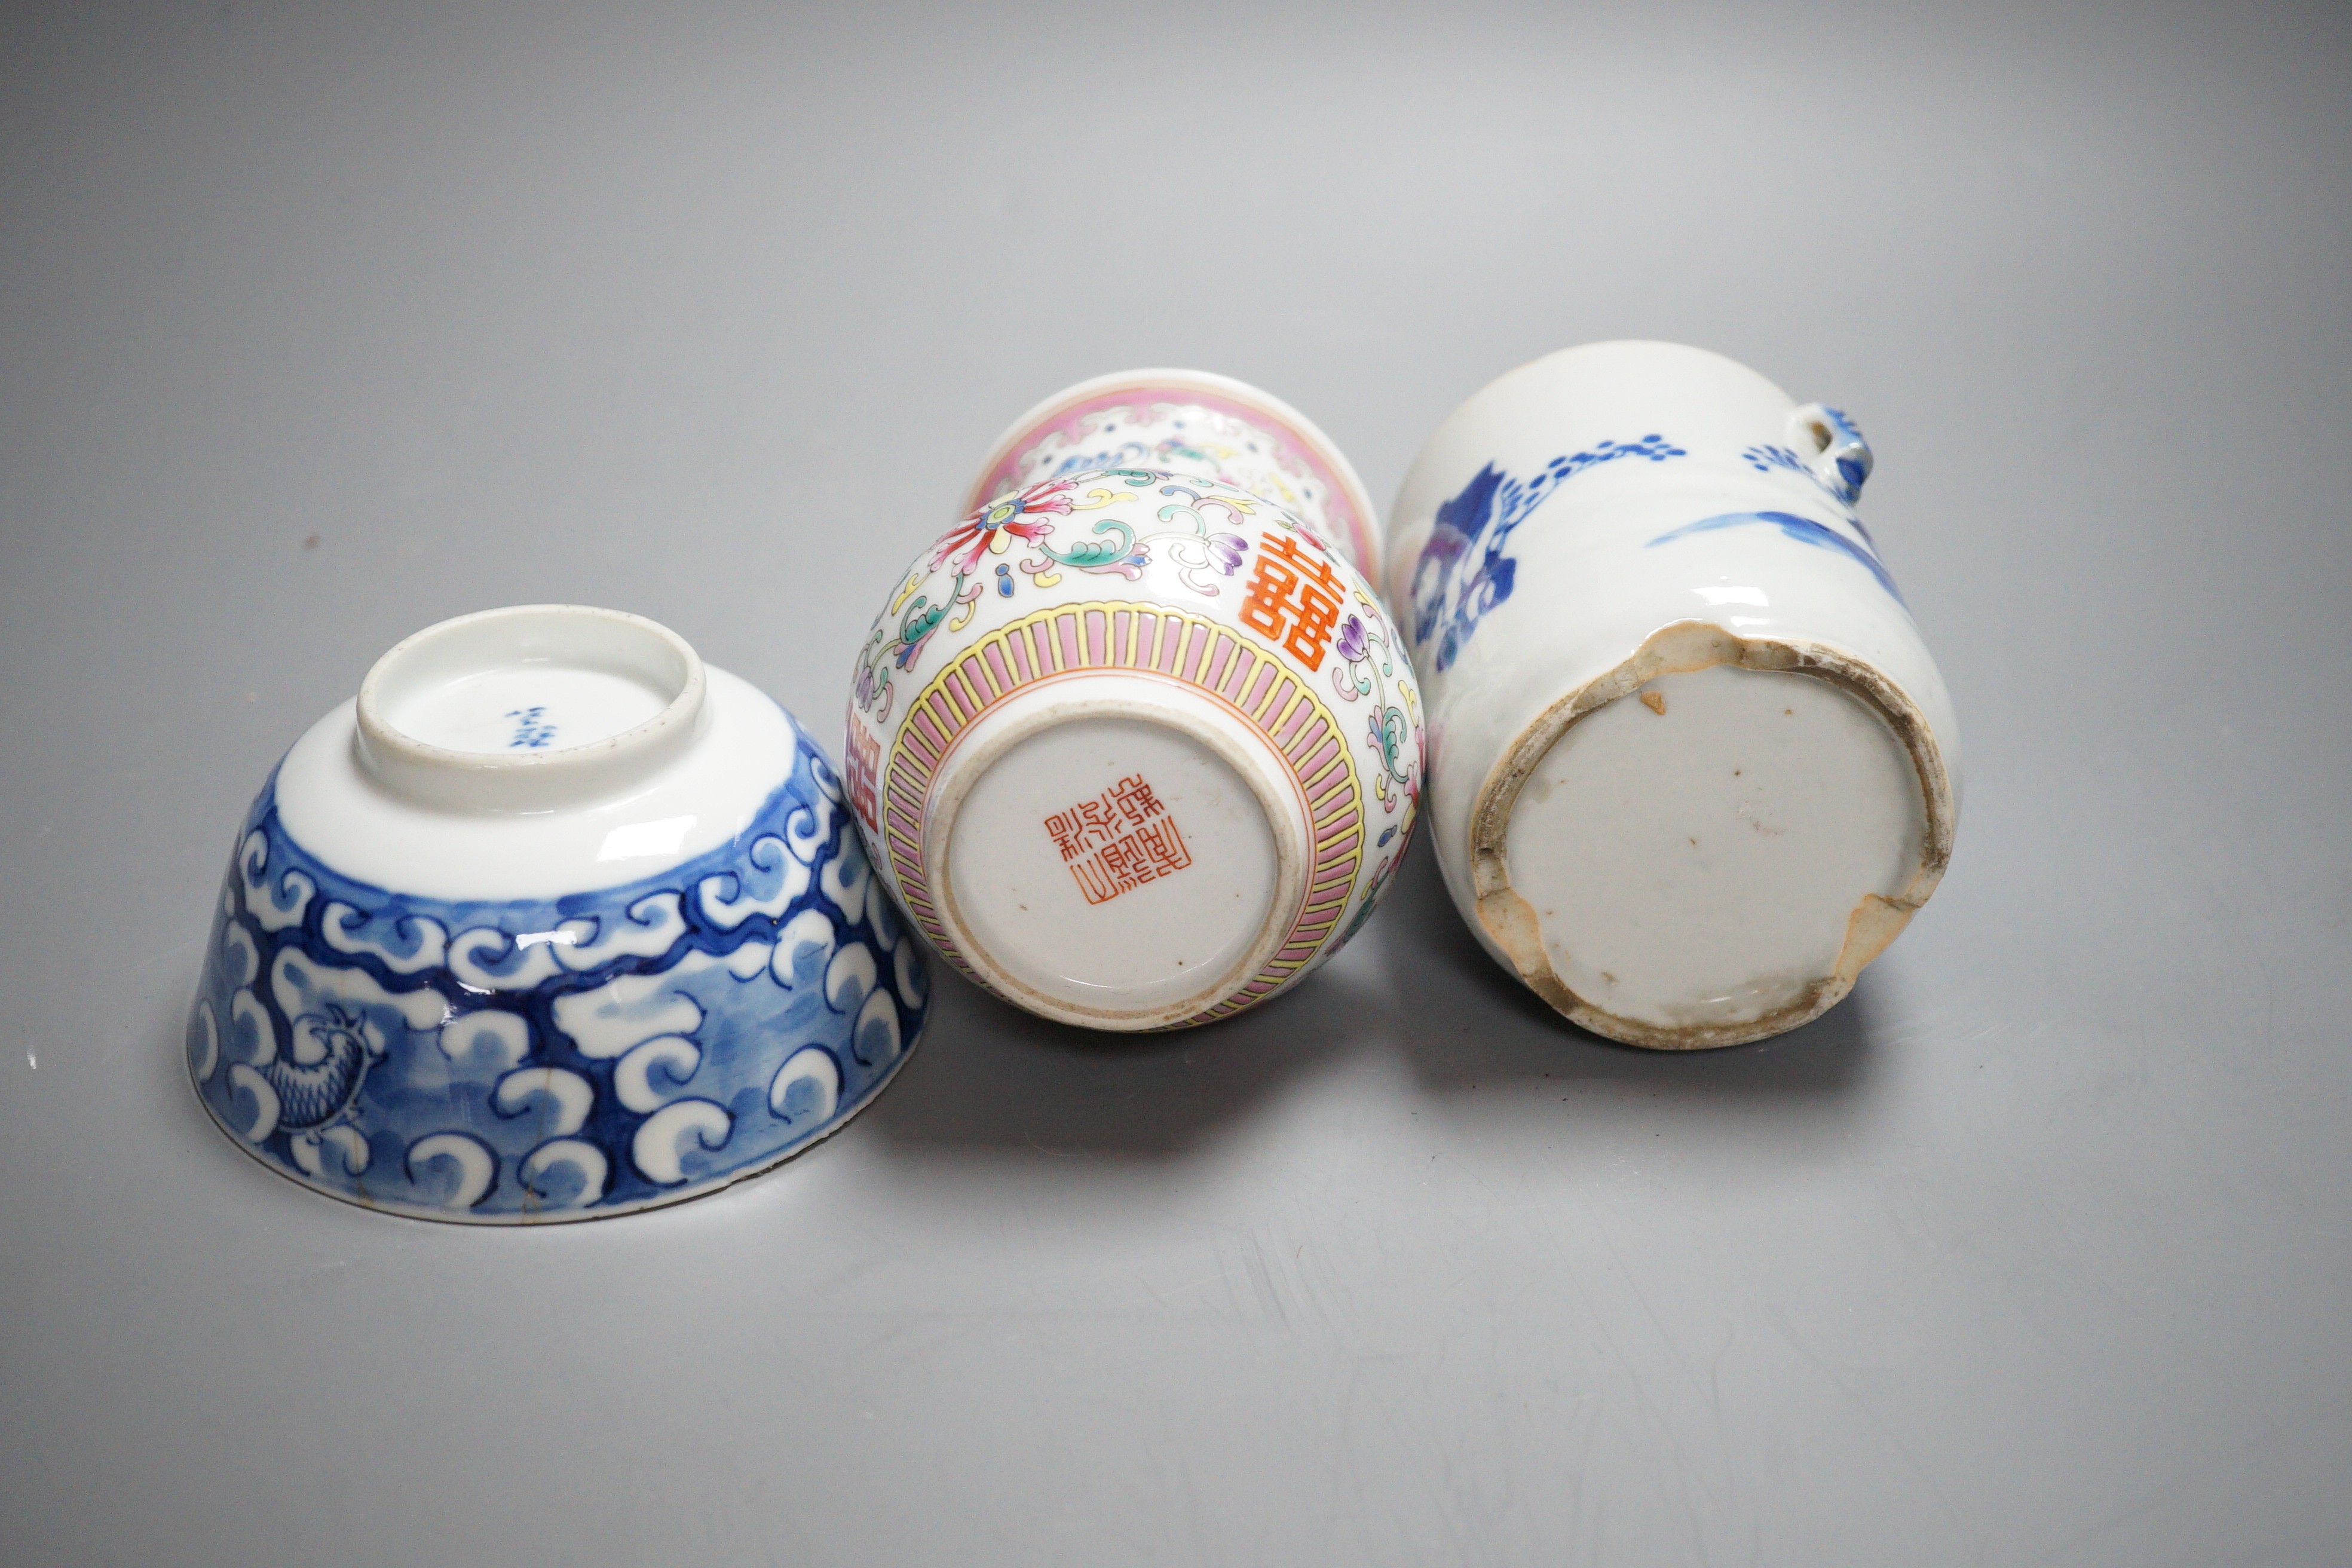 An early 20th century Chinese famille rose vase, a Chinese blue and white jar, lacking cover and a blue and white bowl